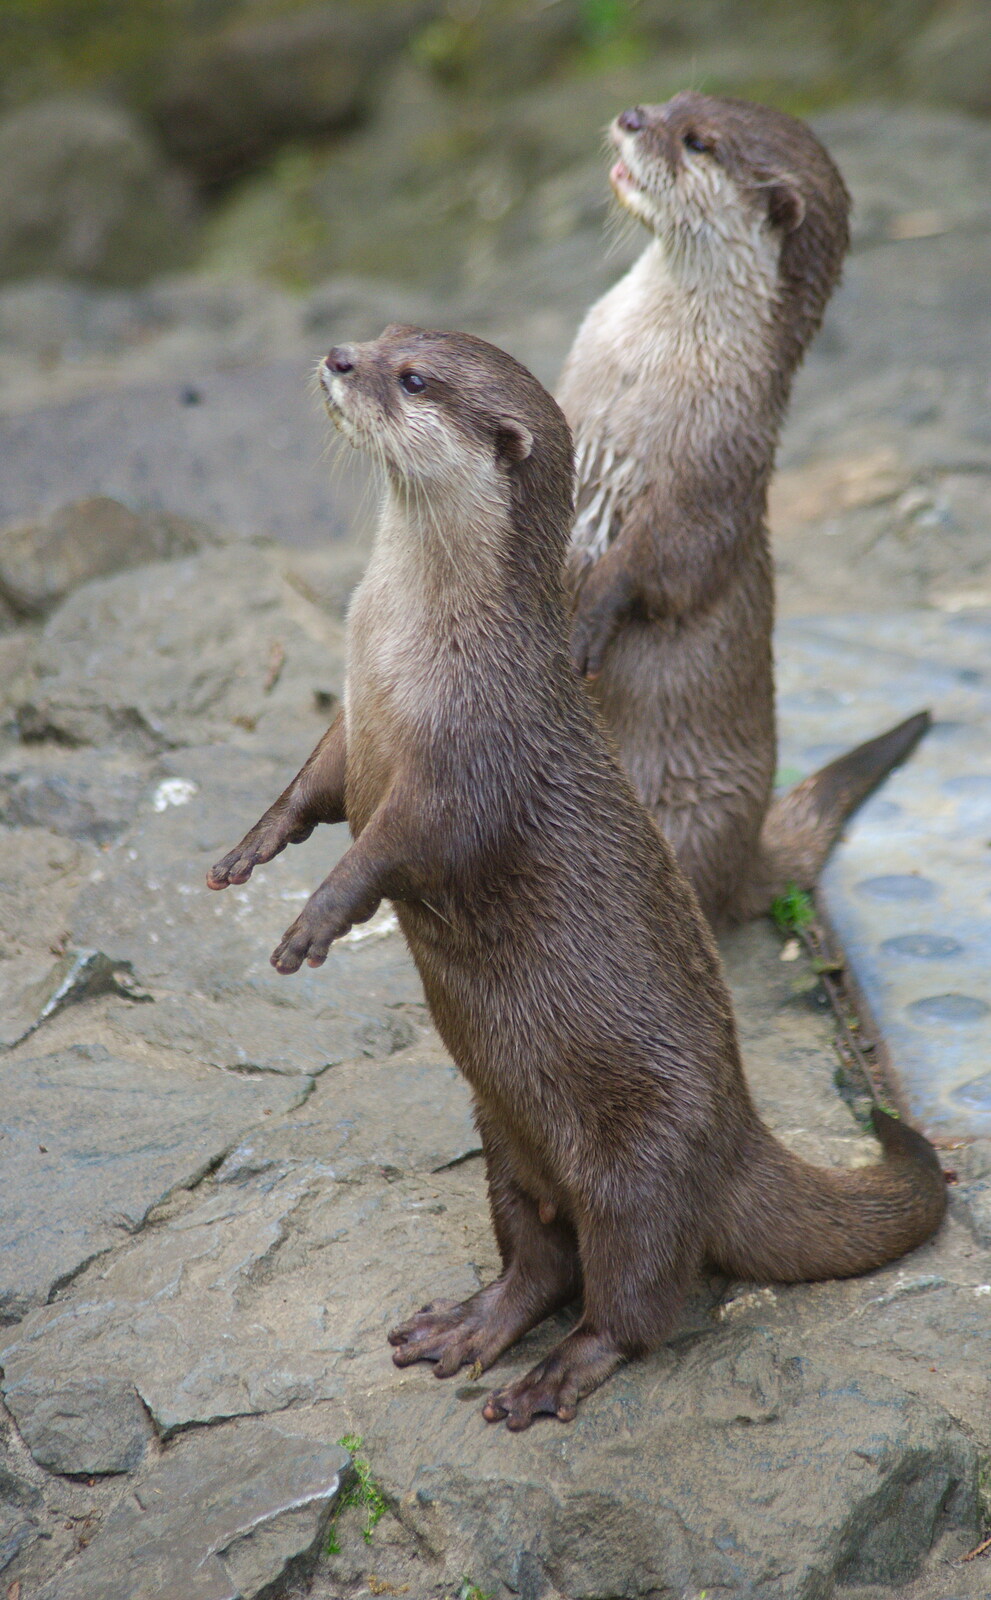 The two otters sit on hind legs and chatter from A Birthday Trip to the Zoo, Banham, Norfolk - 26th May 2014